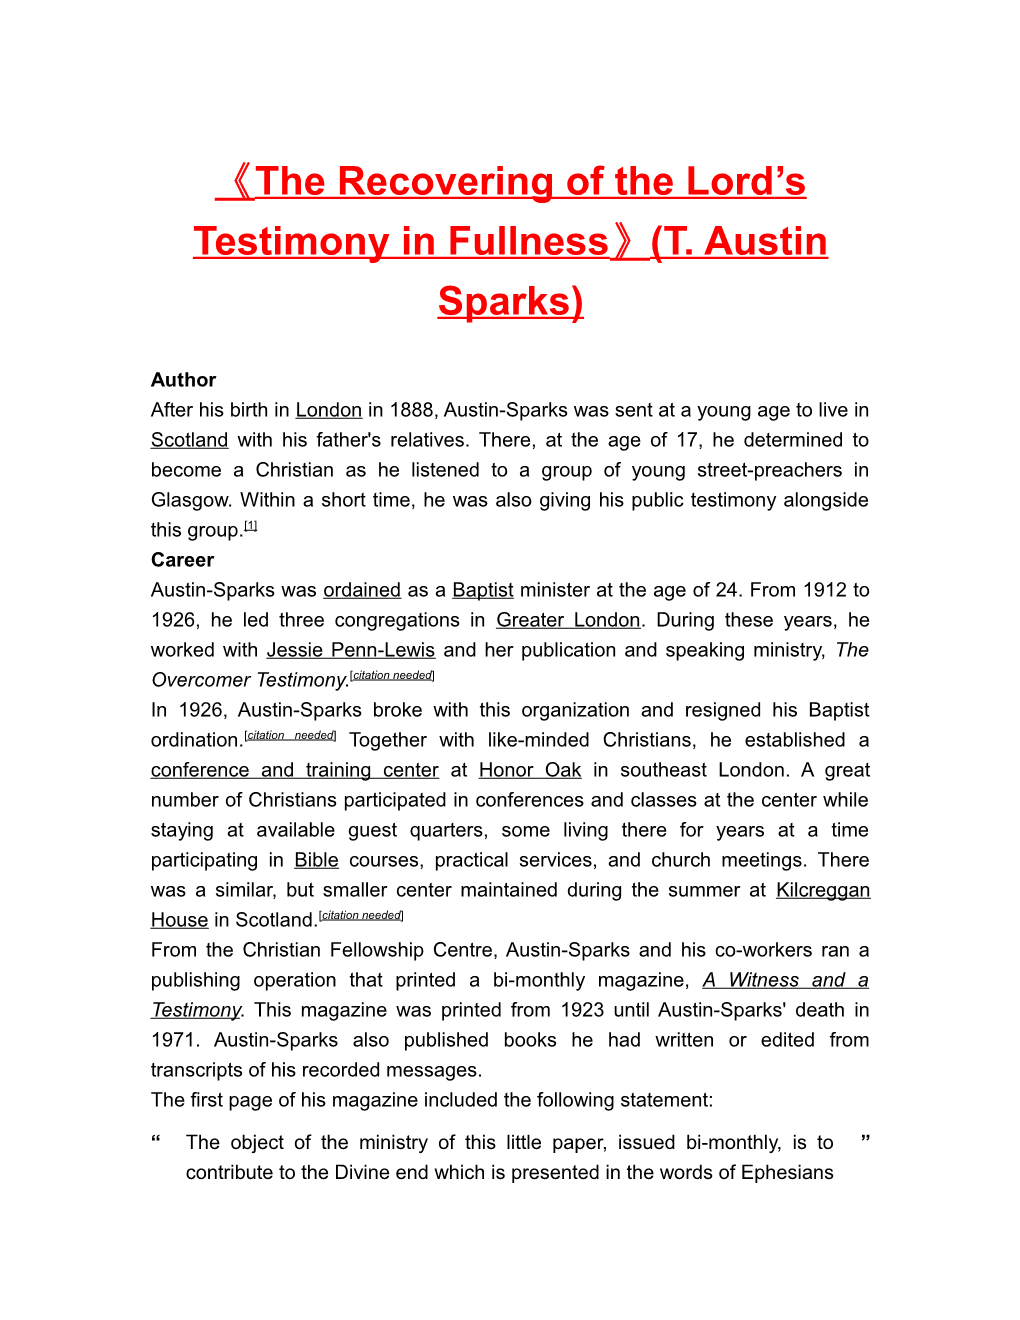 The Recovering of the Lord S Testimony in Fullness (T. Austin Sparks)